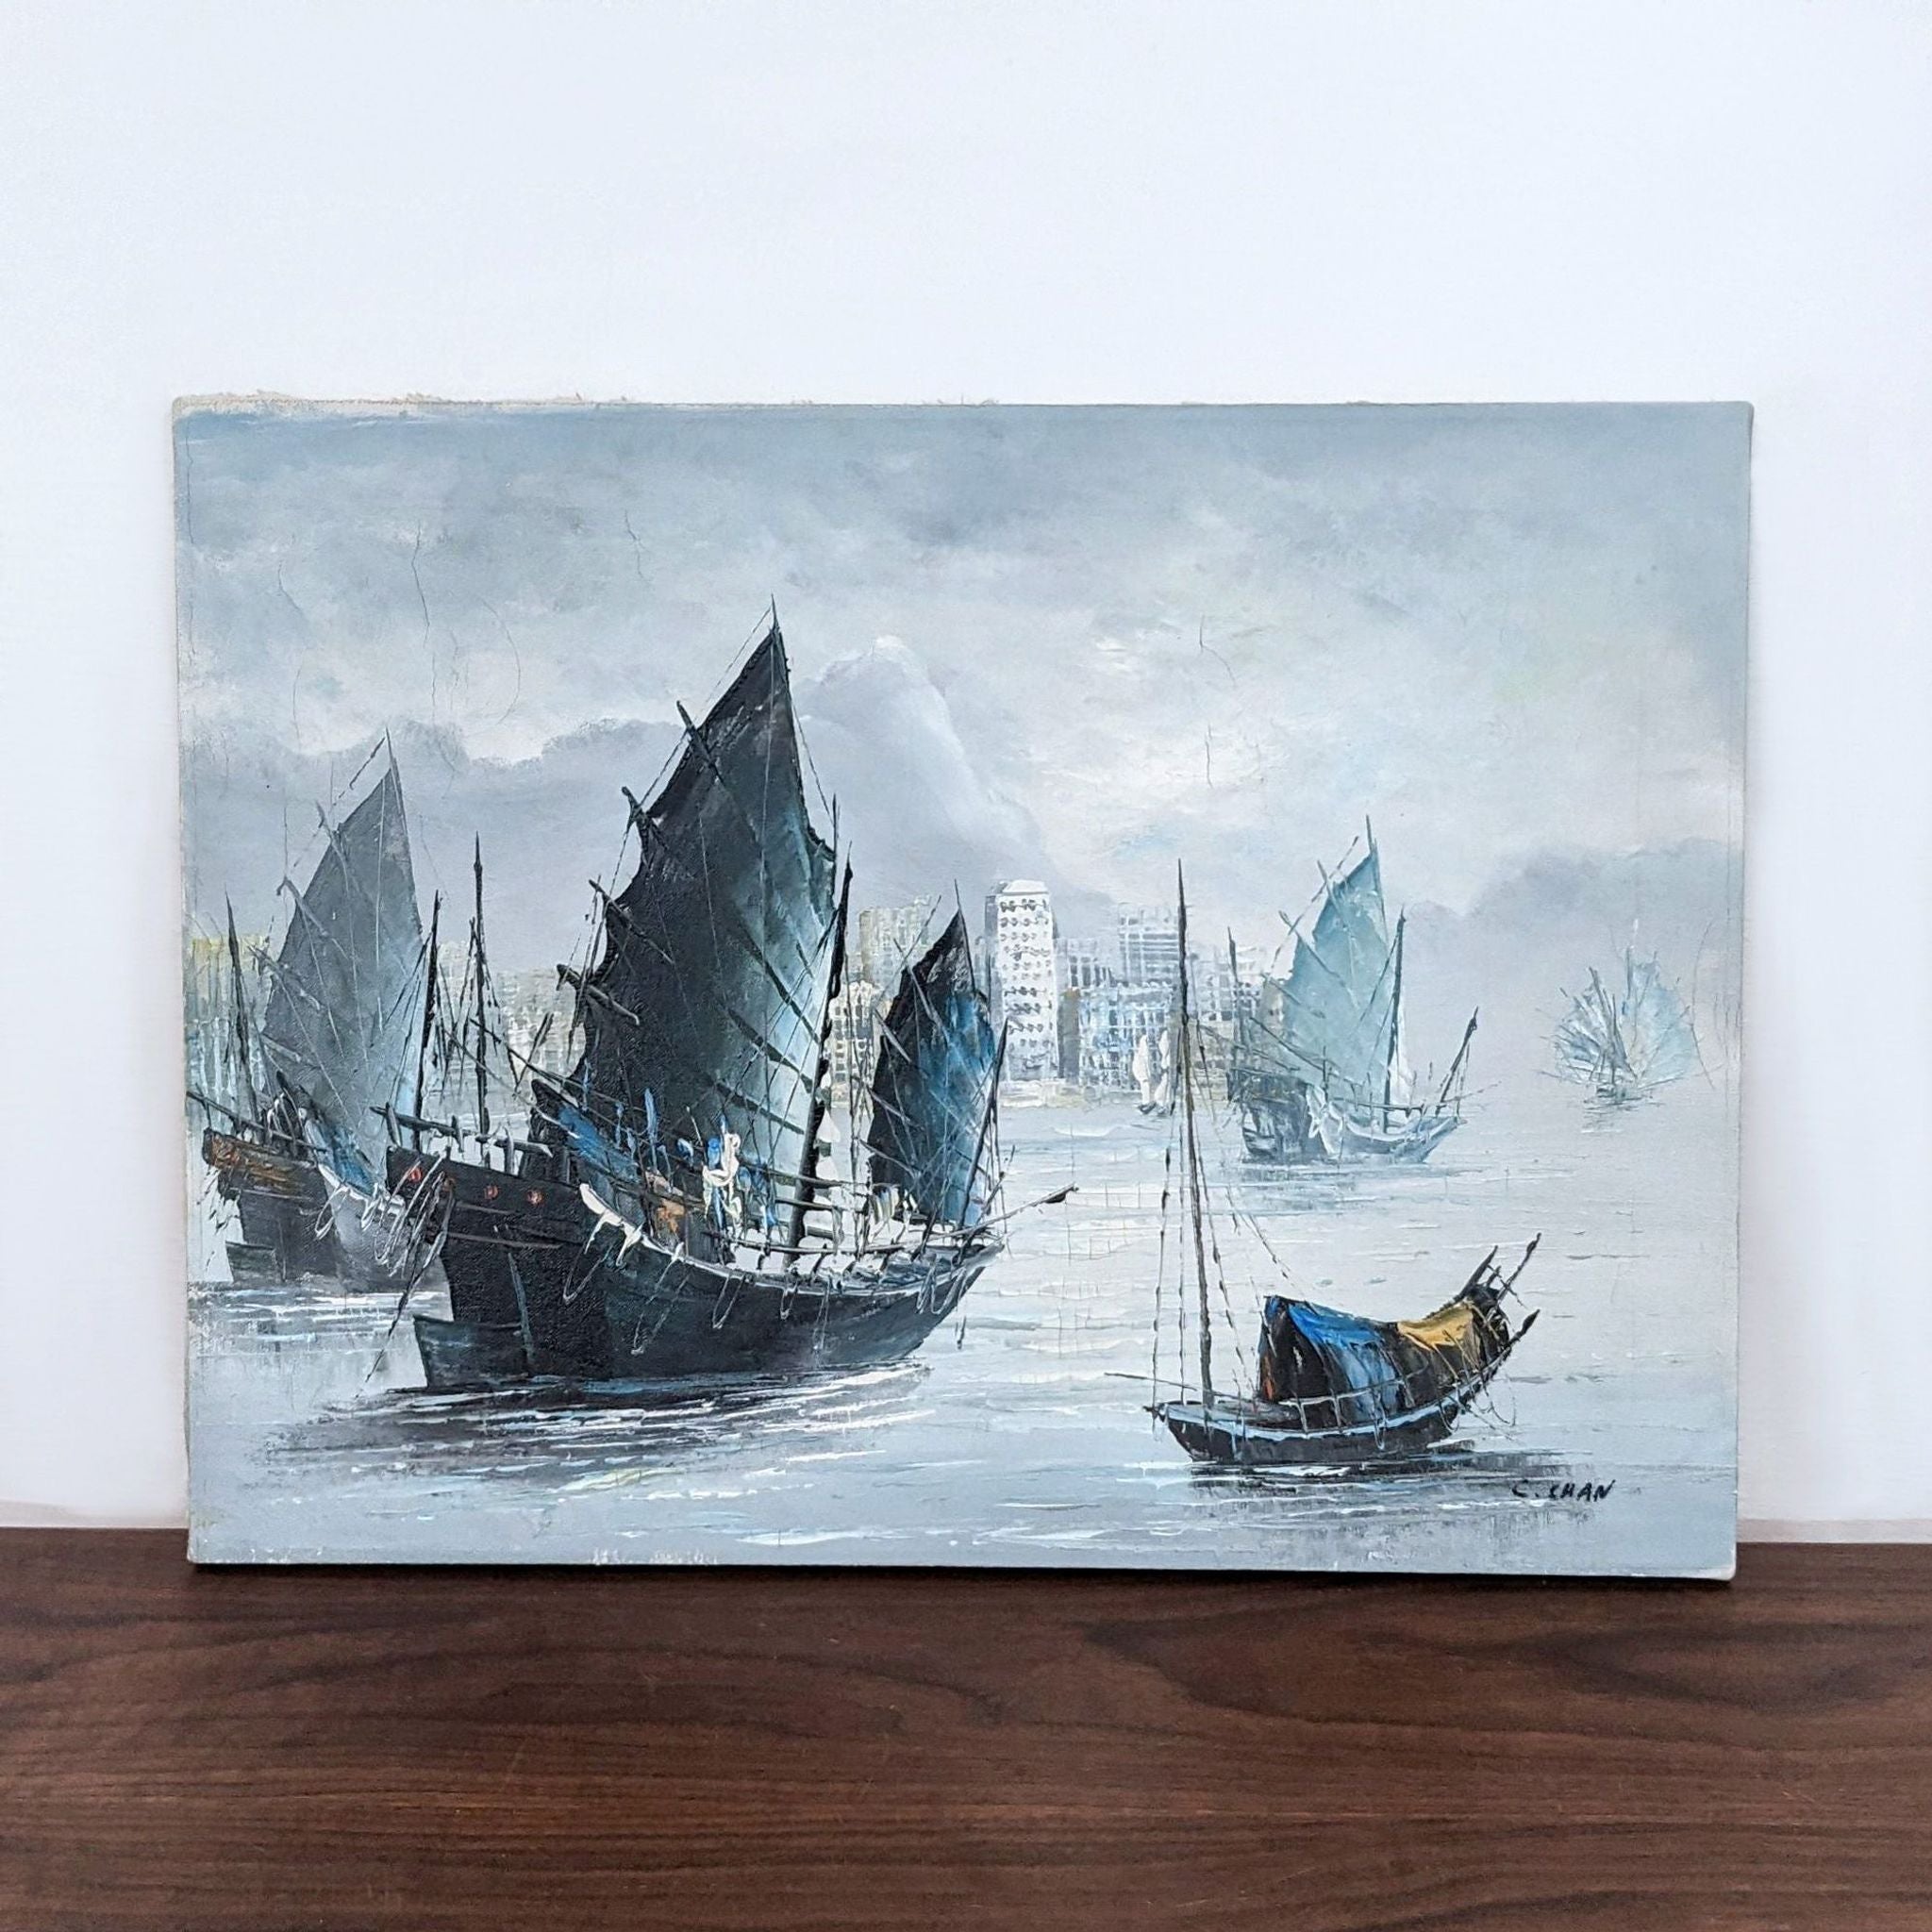 Reperch painting depicting sailboats in harbor with foggy cityscape in background, artwork signed.